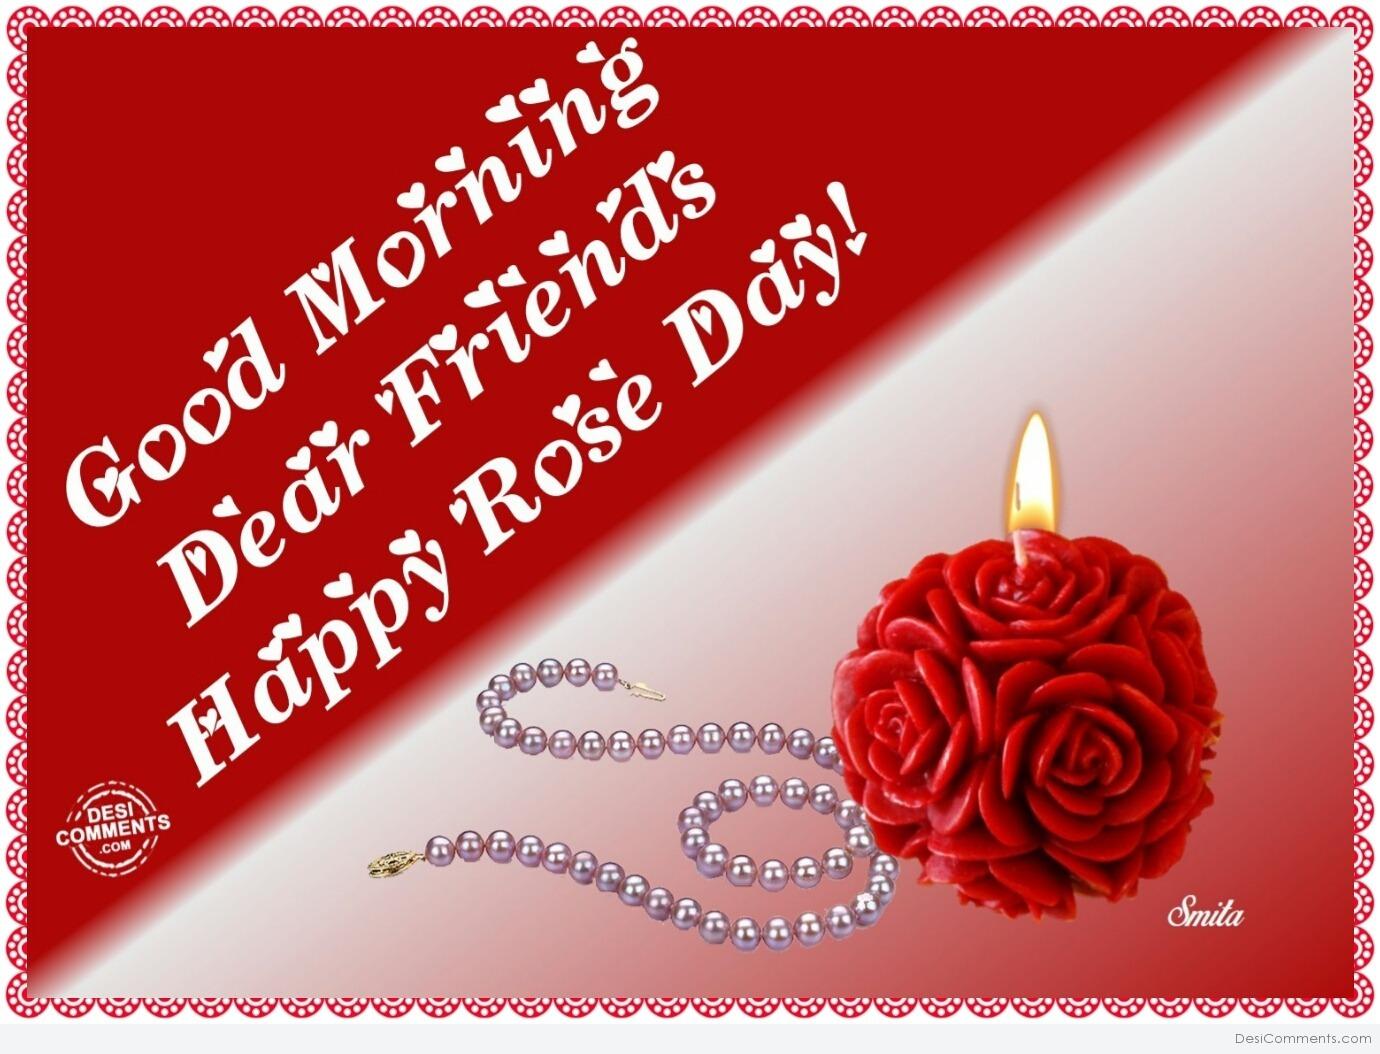 Good Morning Dear Friends! Happy Rose Day! - DesiComments.com